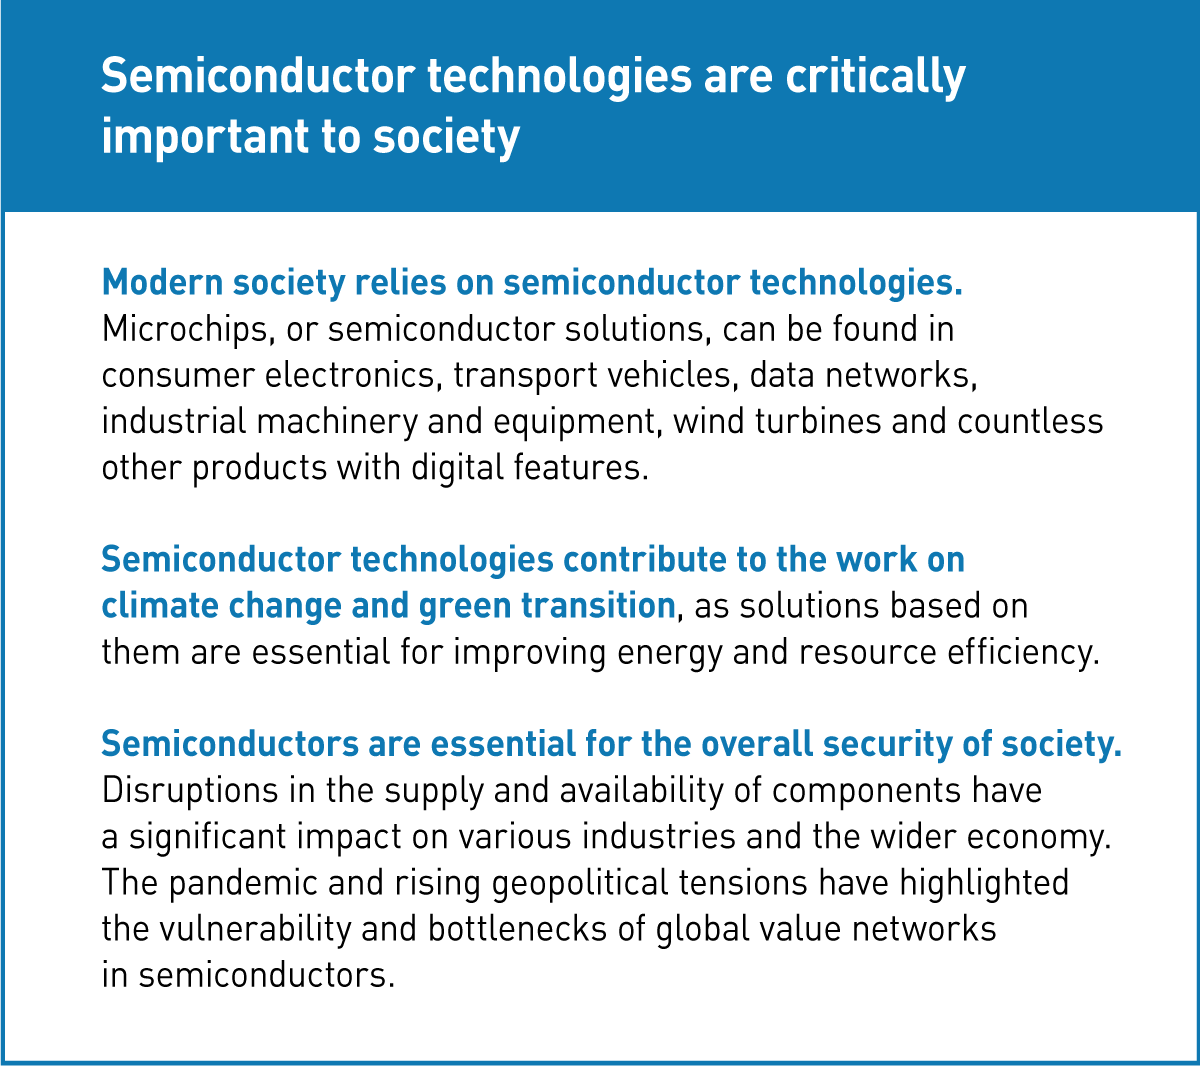 Strategical importance of semiconductors